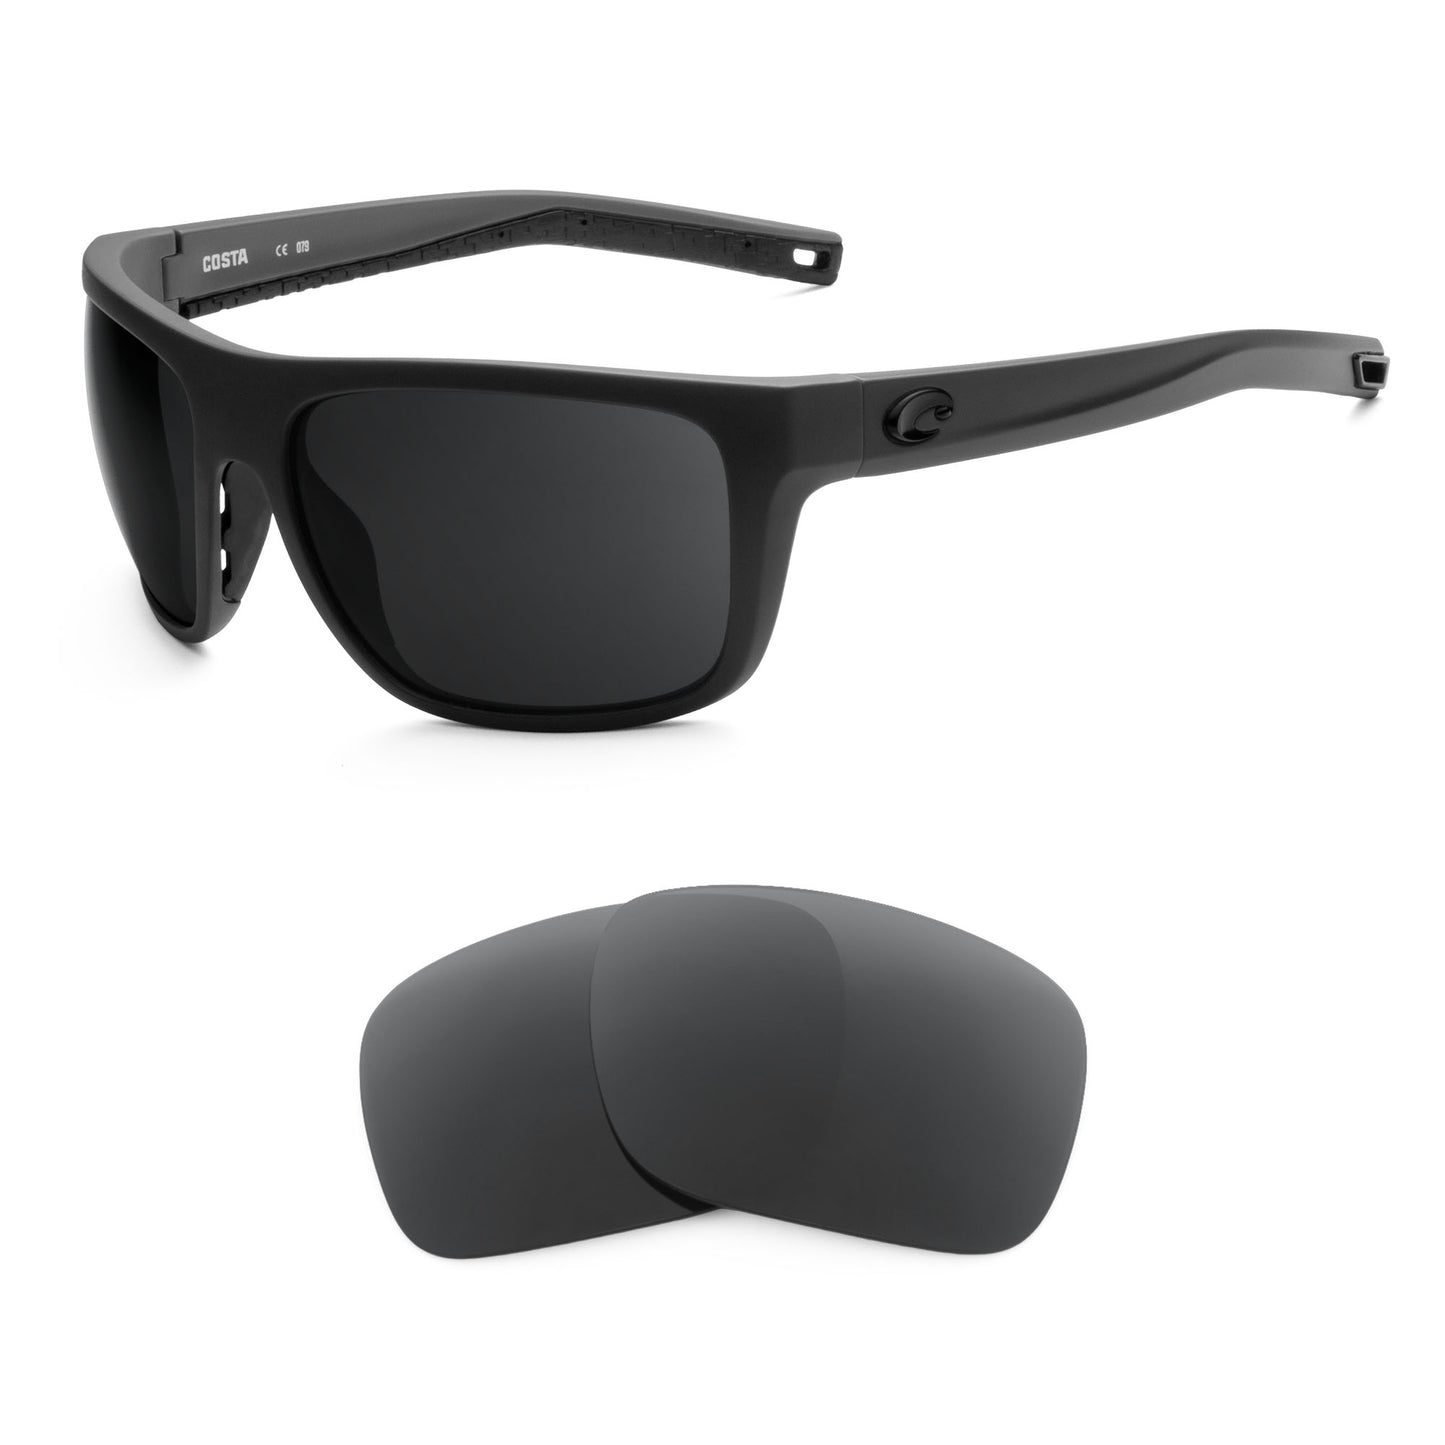 Costa Broadbill sunglasses with replacement lenses